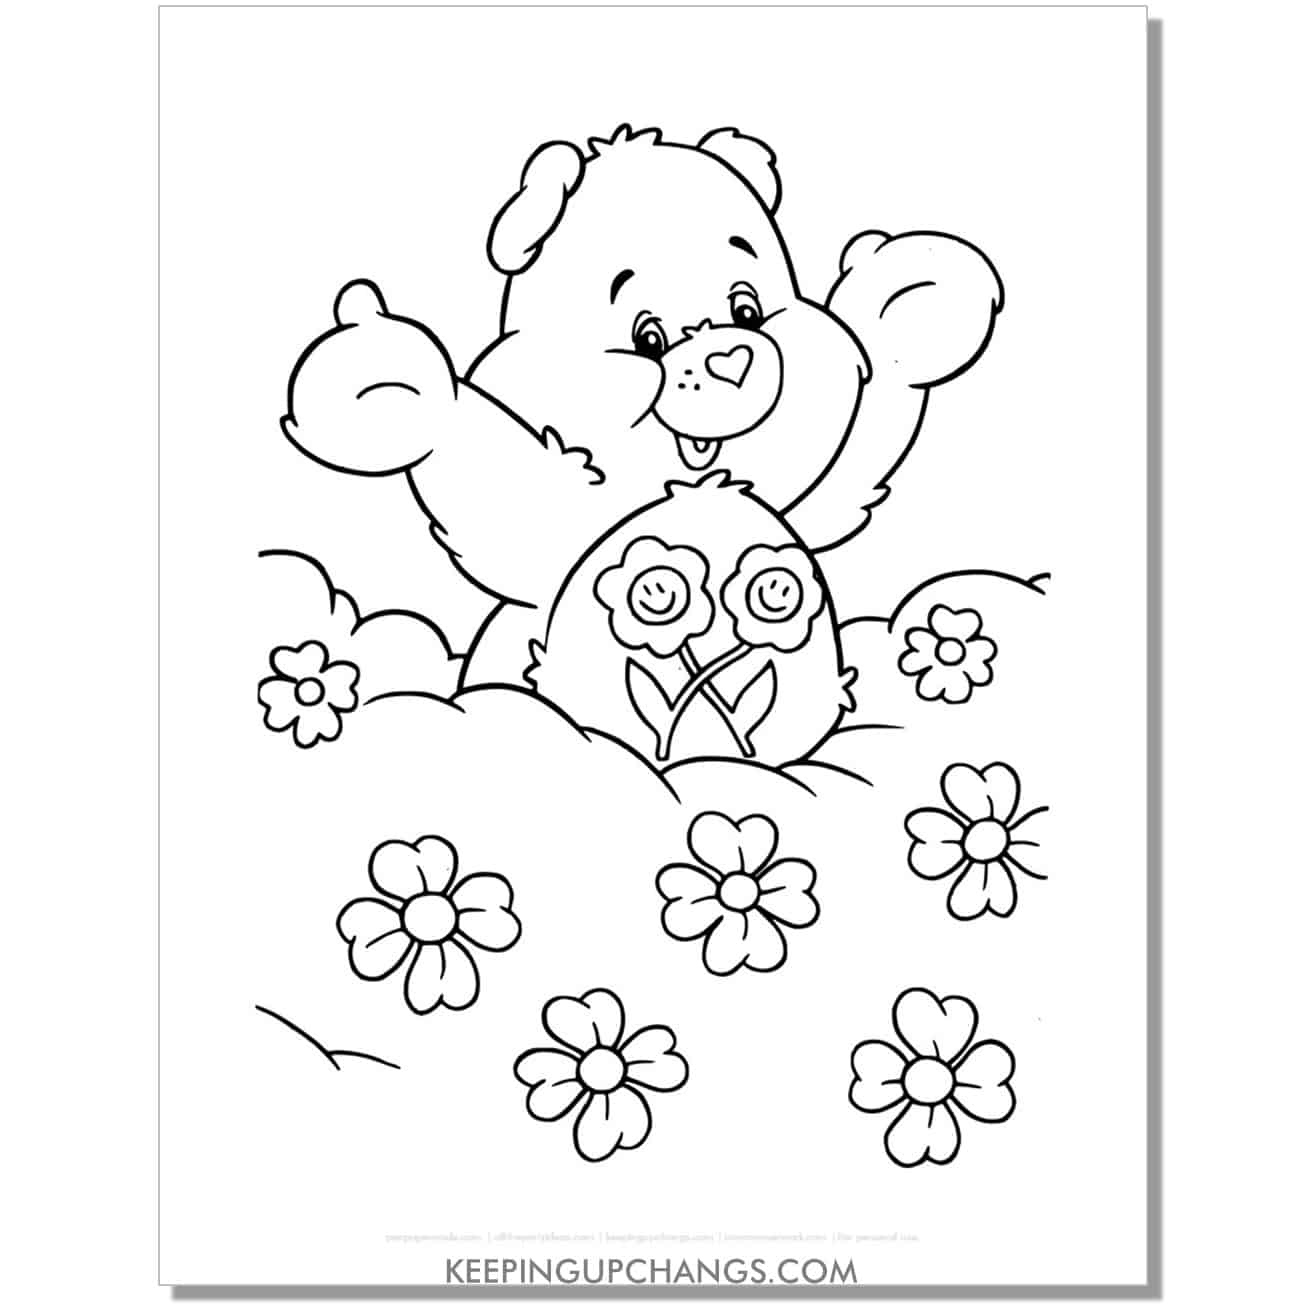 friend bear in field of daisies care bear coloring page, sheet.